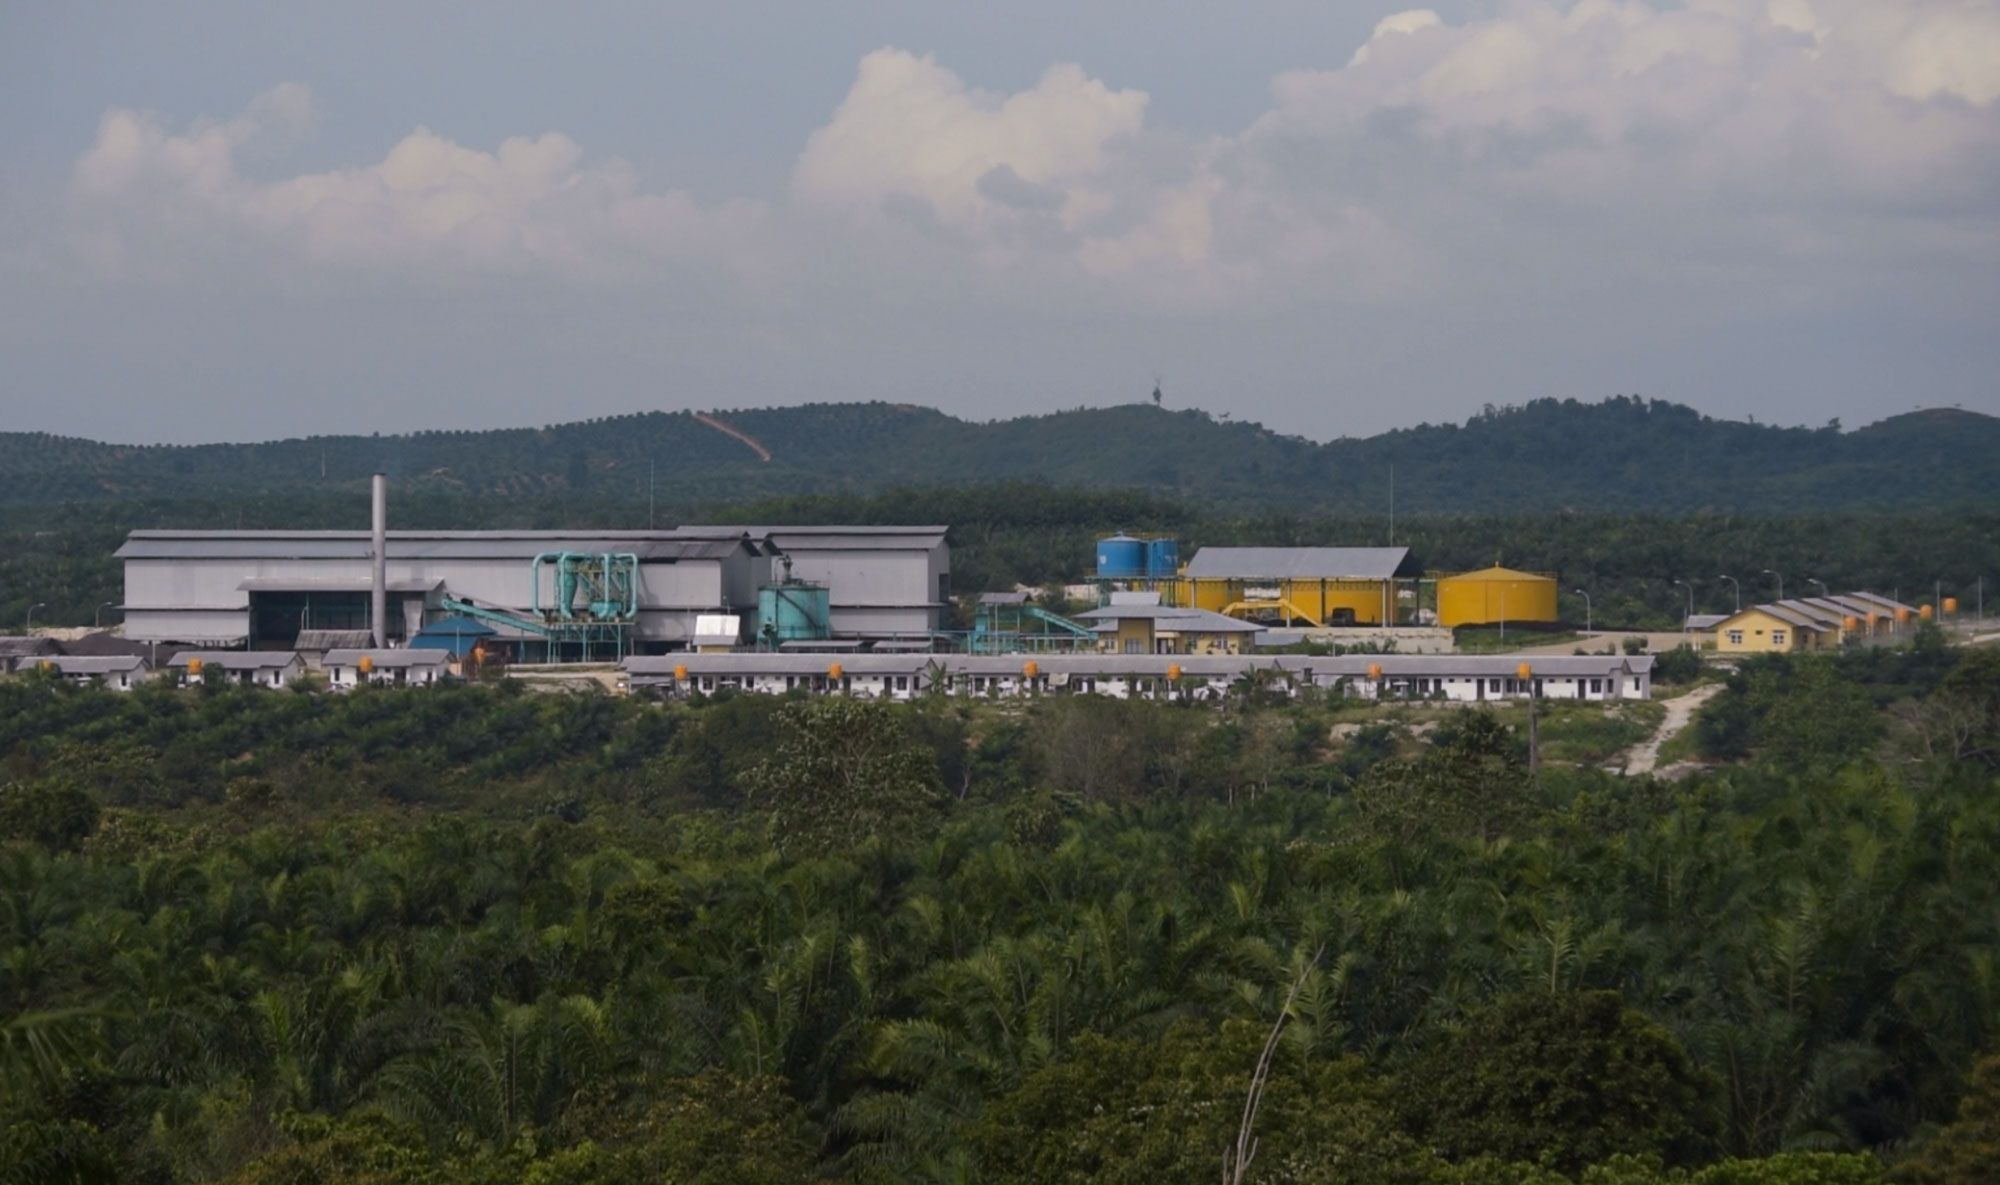 Every acre is utilized at a palm oil plantation in East Kalimantan. Employee housing surrounds a refinery, which occupies the center of a highly manicured stand of oil palms